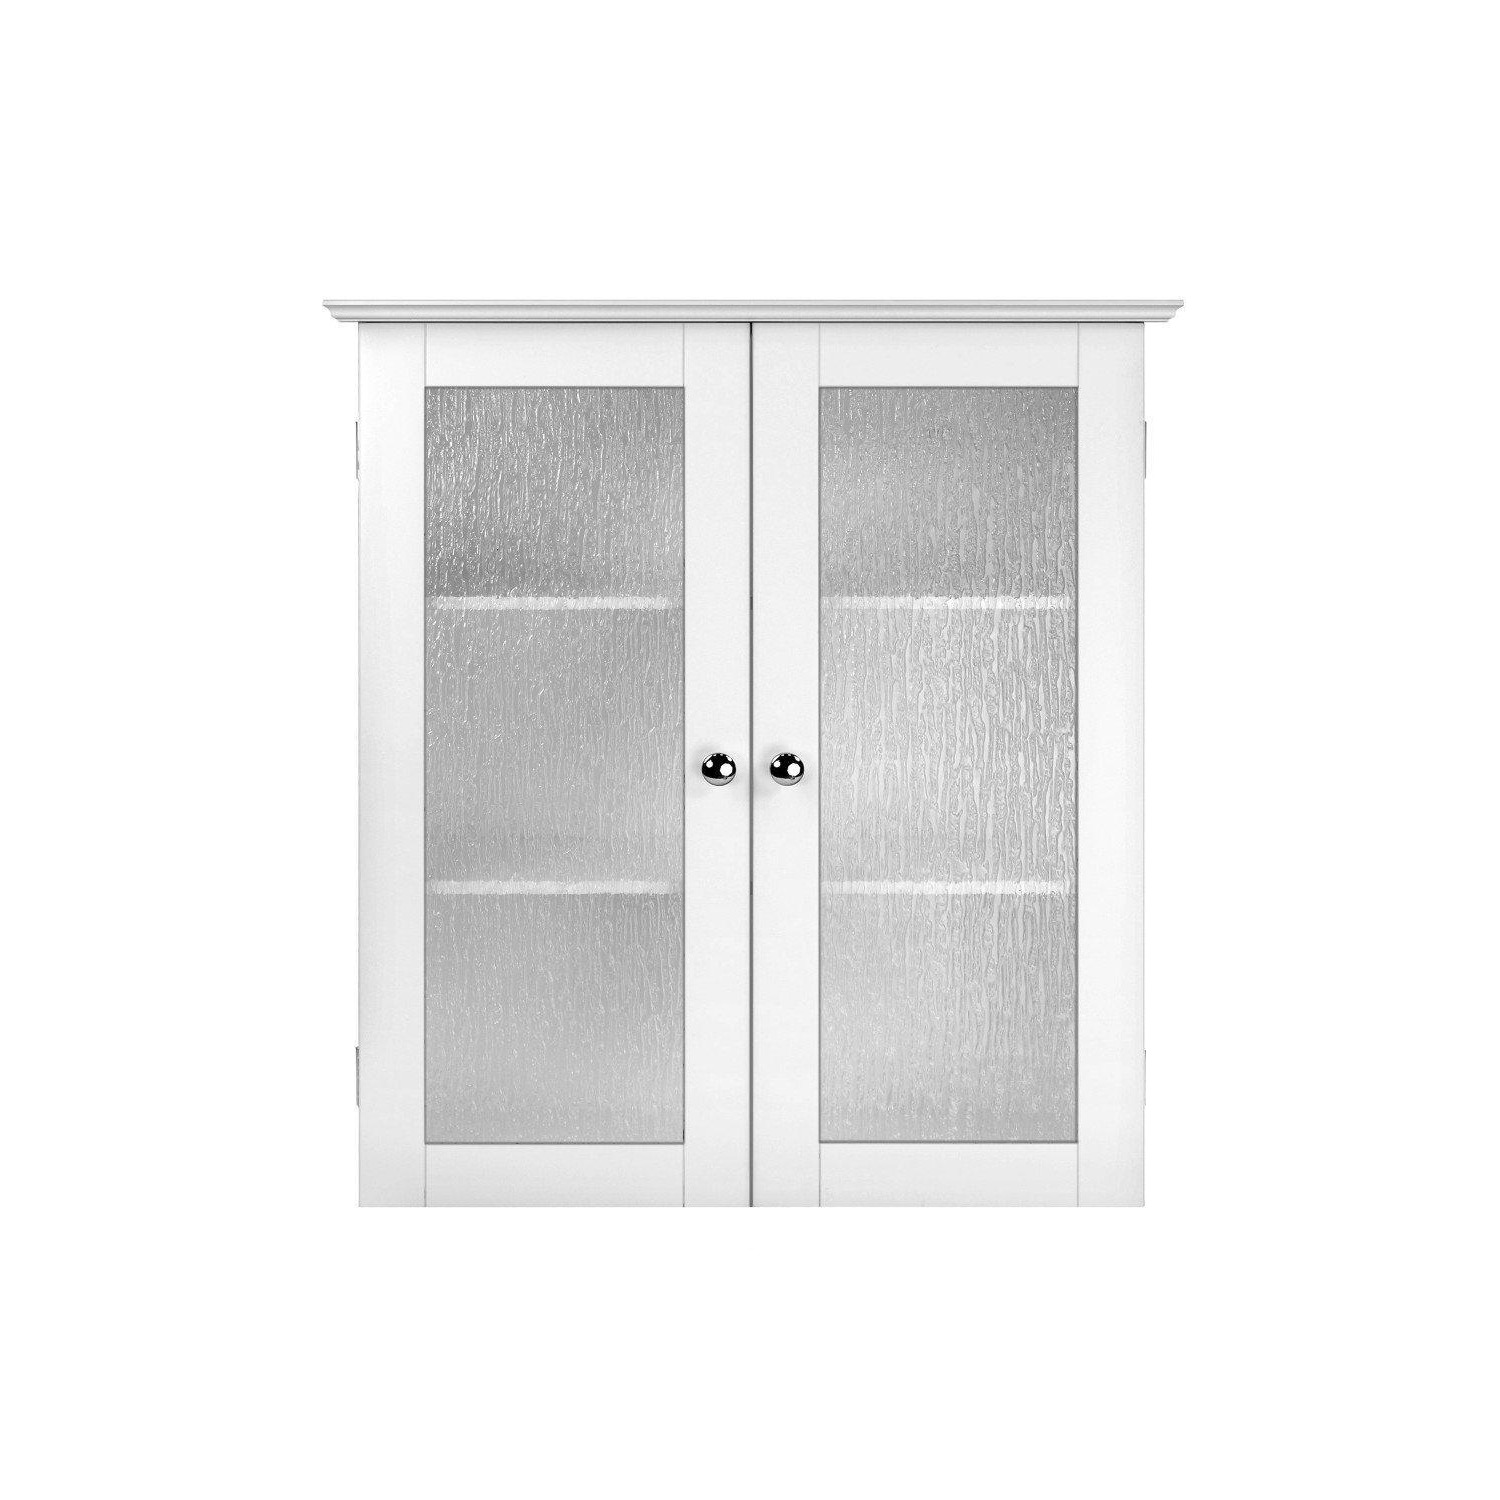 Bathroom Connor Wall Cabinet With 2 Glass Doors White - image 1